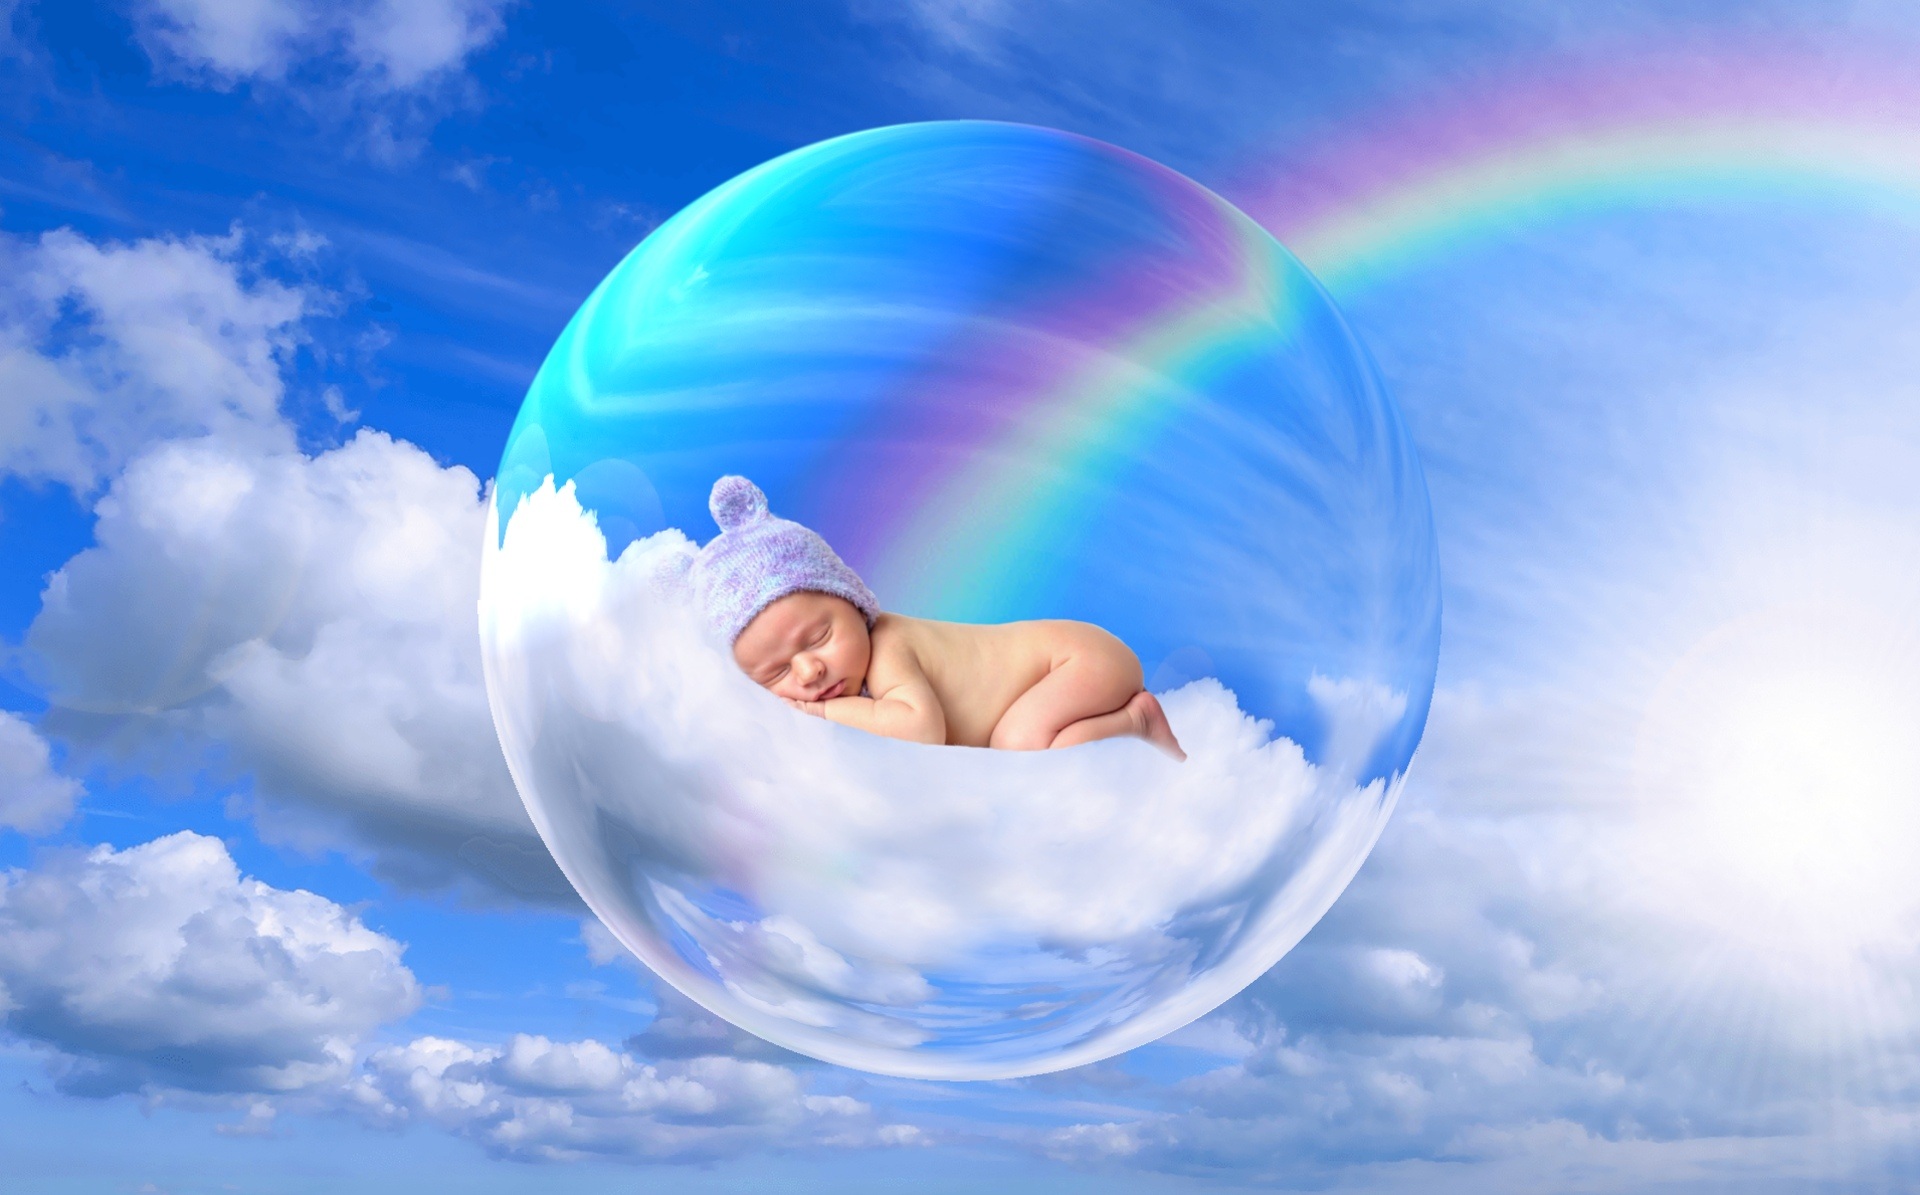 a child in a bubble